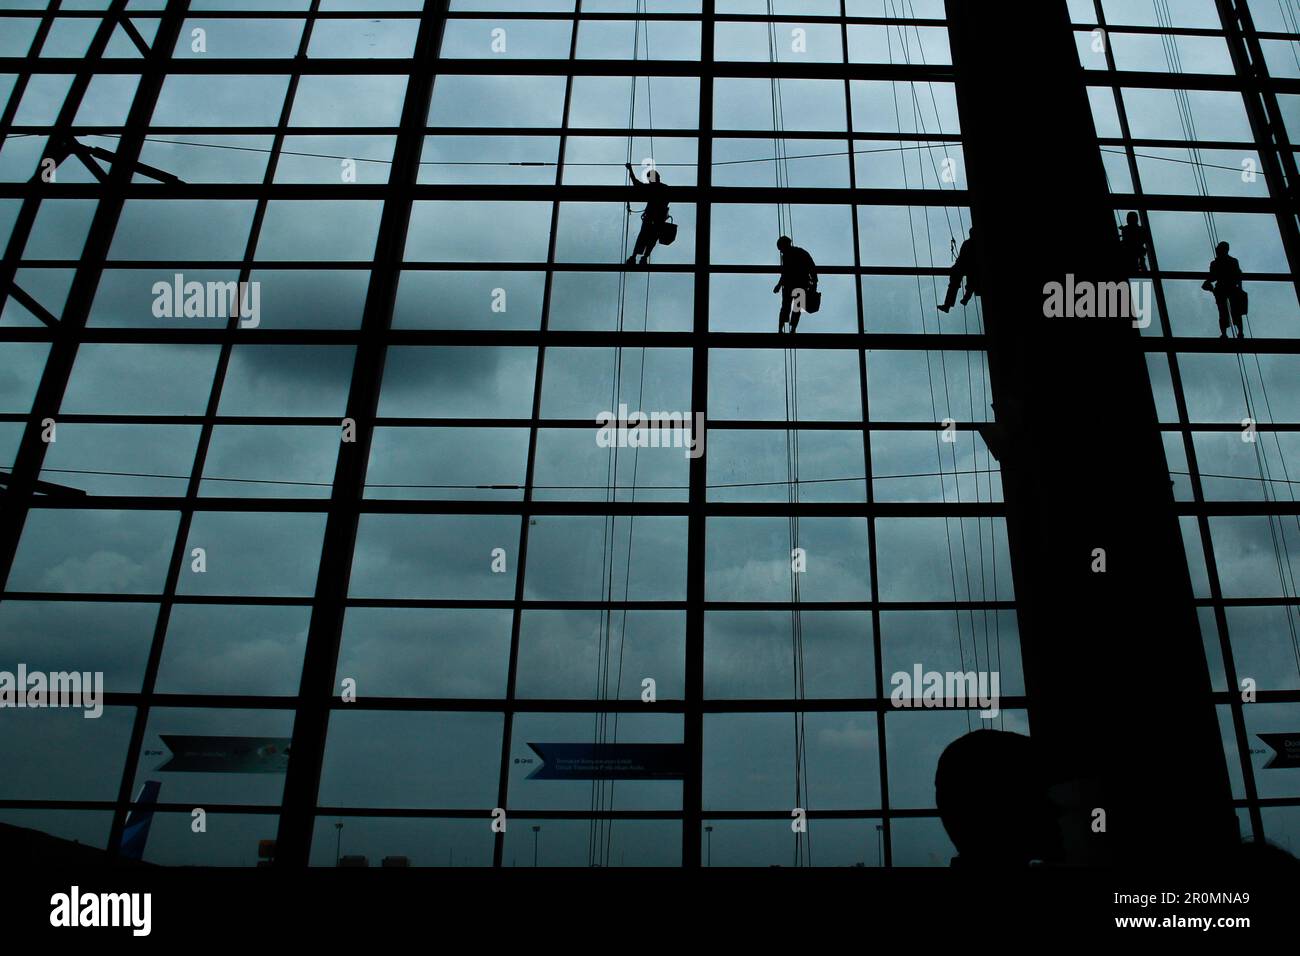 A silhouette of a worker cleaning windows hangs from a rope in the airport building. Stock Photo